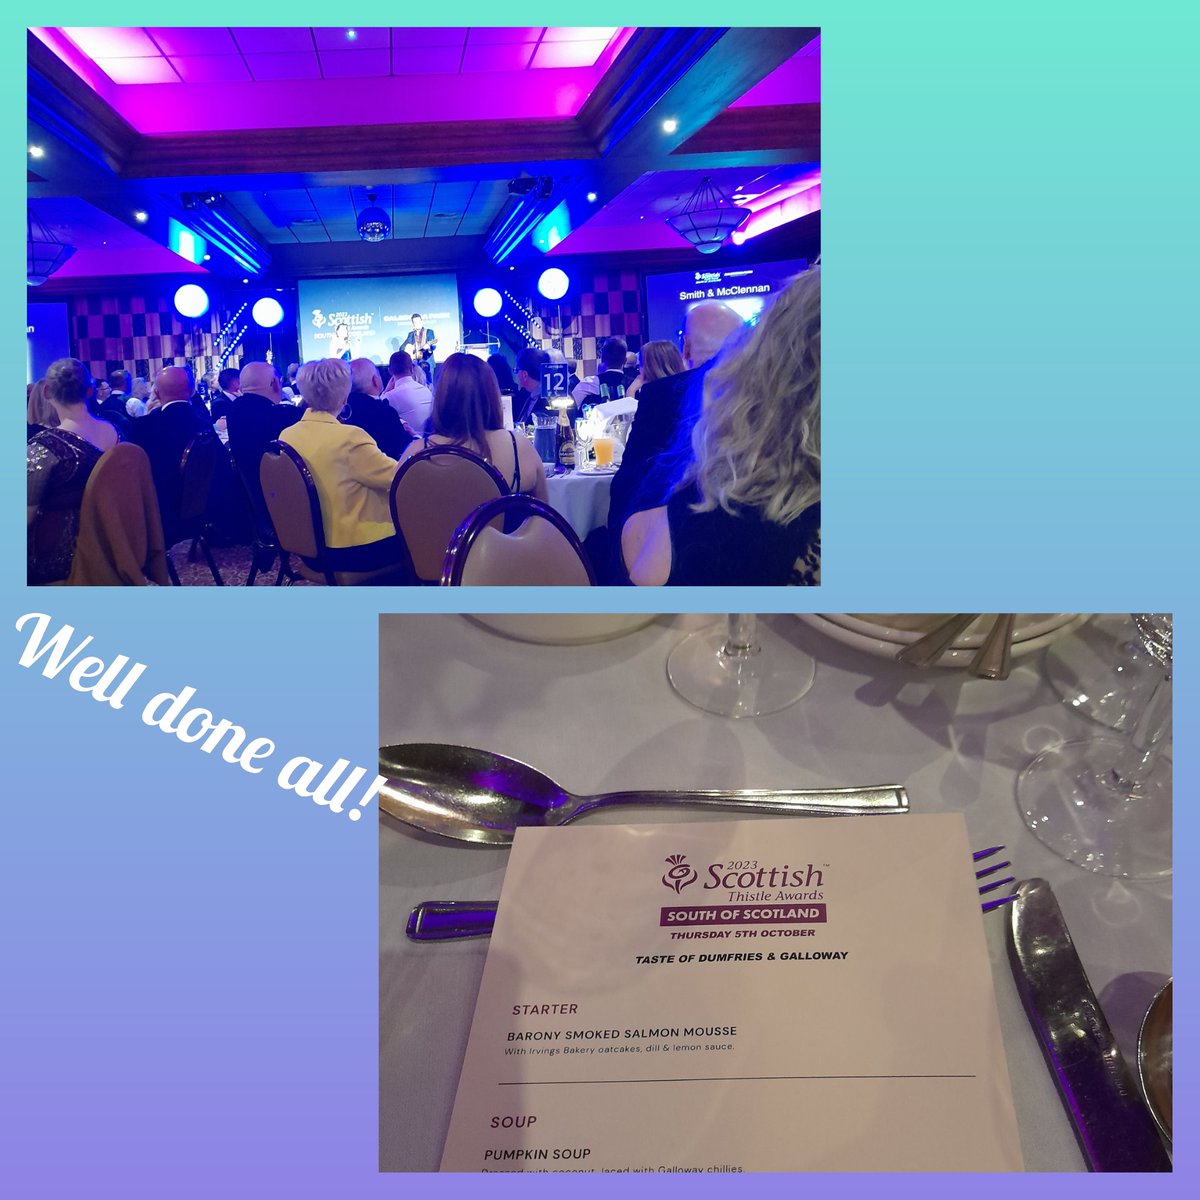 Great night at the inaugural #ThistleAwards for the South of Scotland. Well done to all the winners. Thanks @SScotDAlliance and @CairndaleHotel